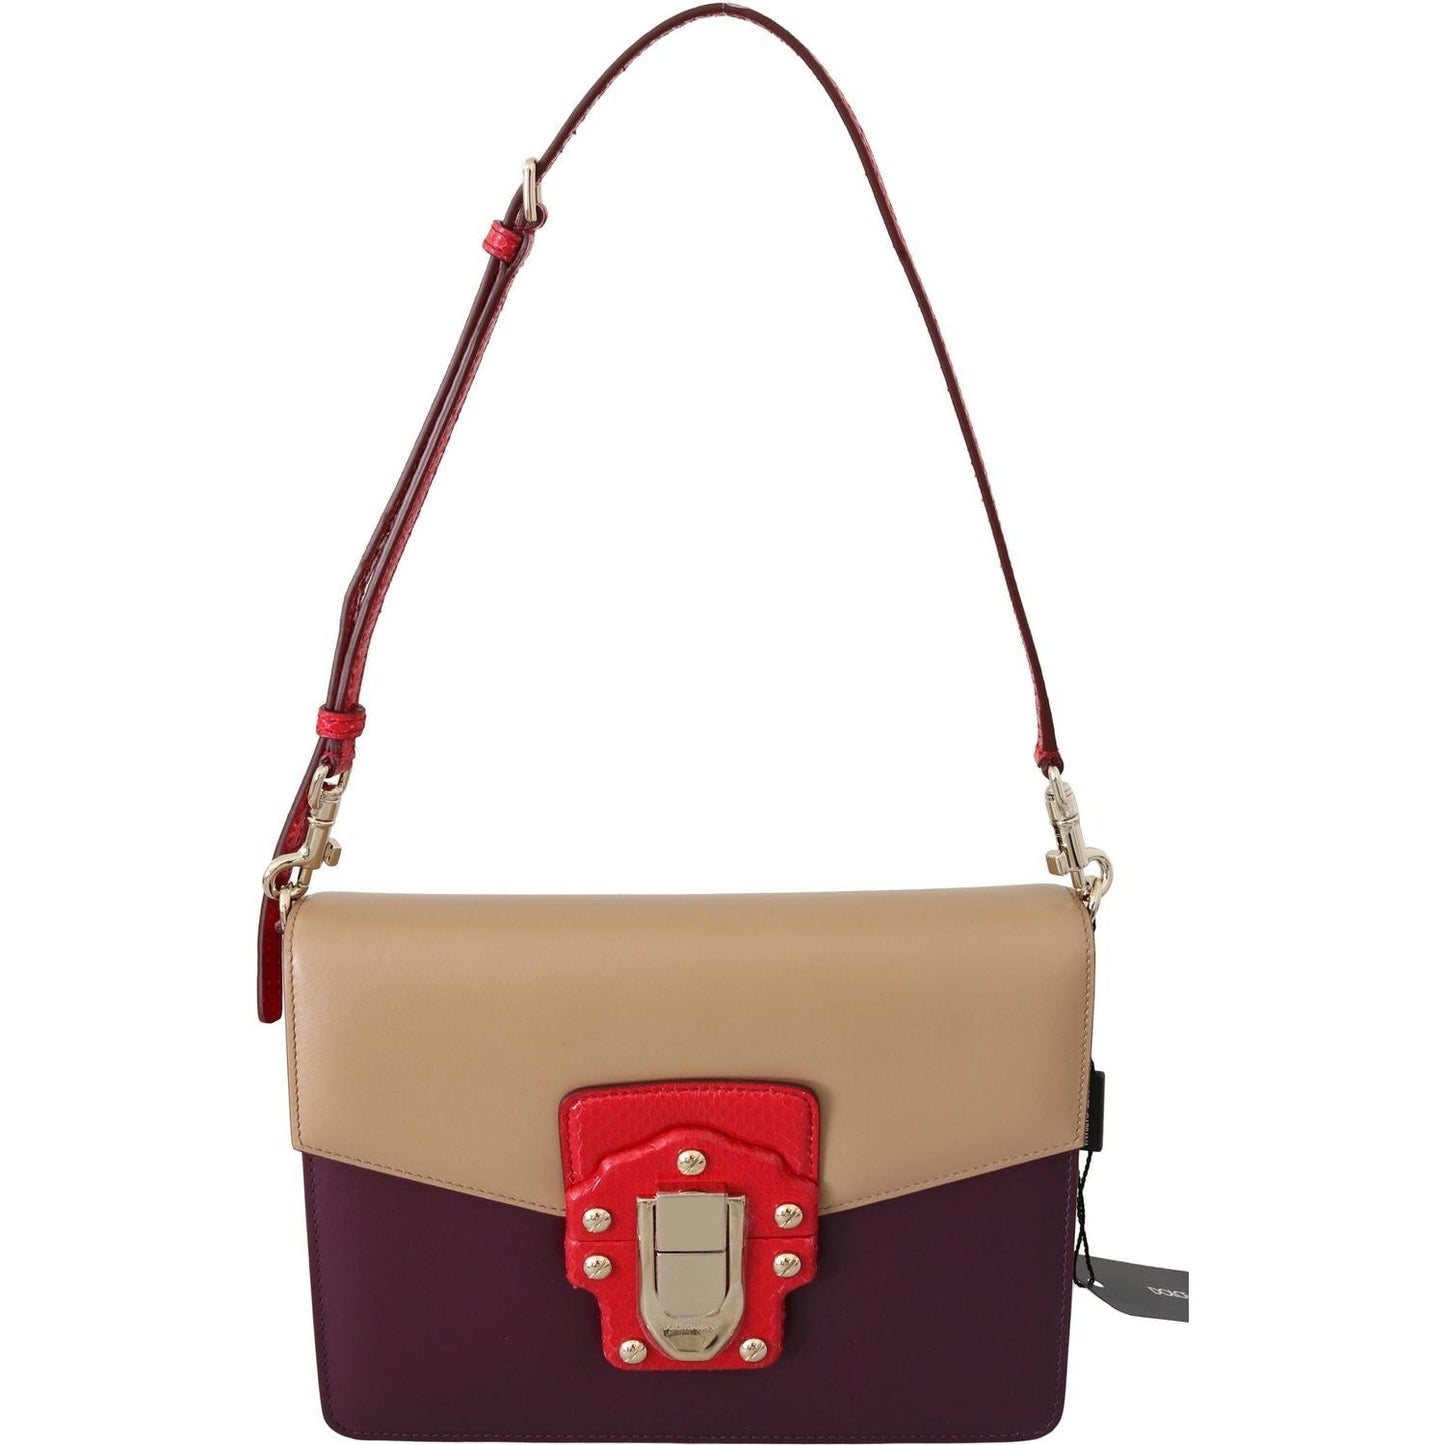 Dolce & Gabbana Exquisite LUCIA Leather Shoulder Bag purple-beige-red-leather-crossbody-purse-bag Purse IMG_0373-2-scaled-e6aeb2f5-bb5.jpg